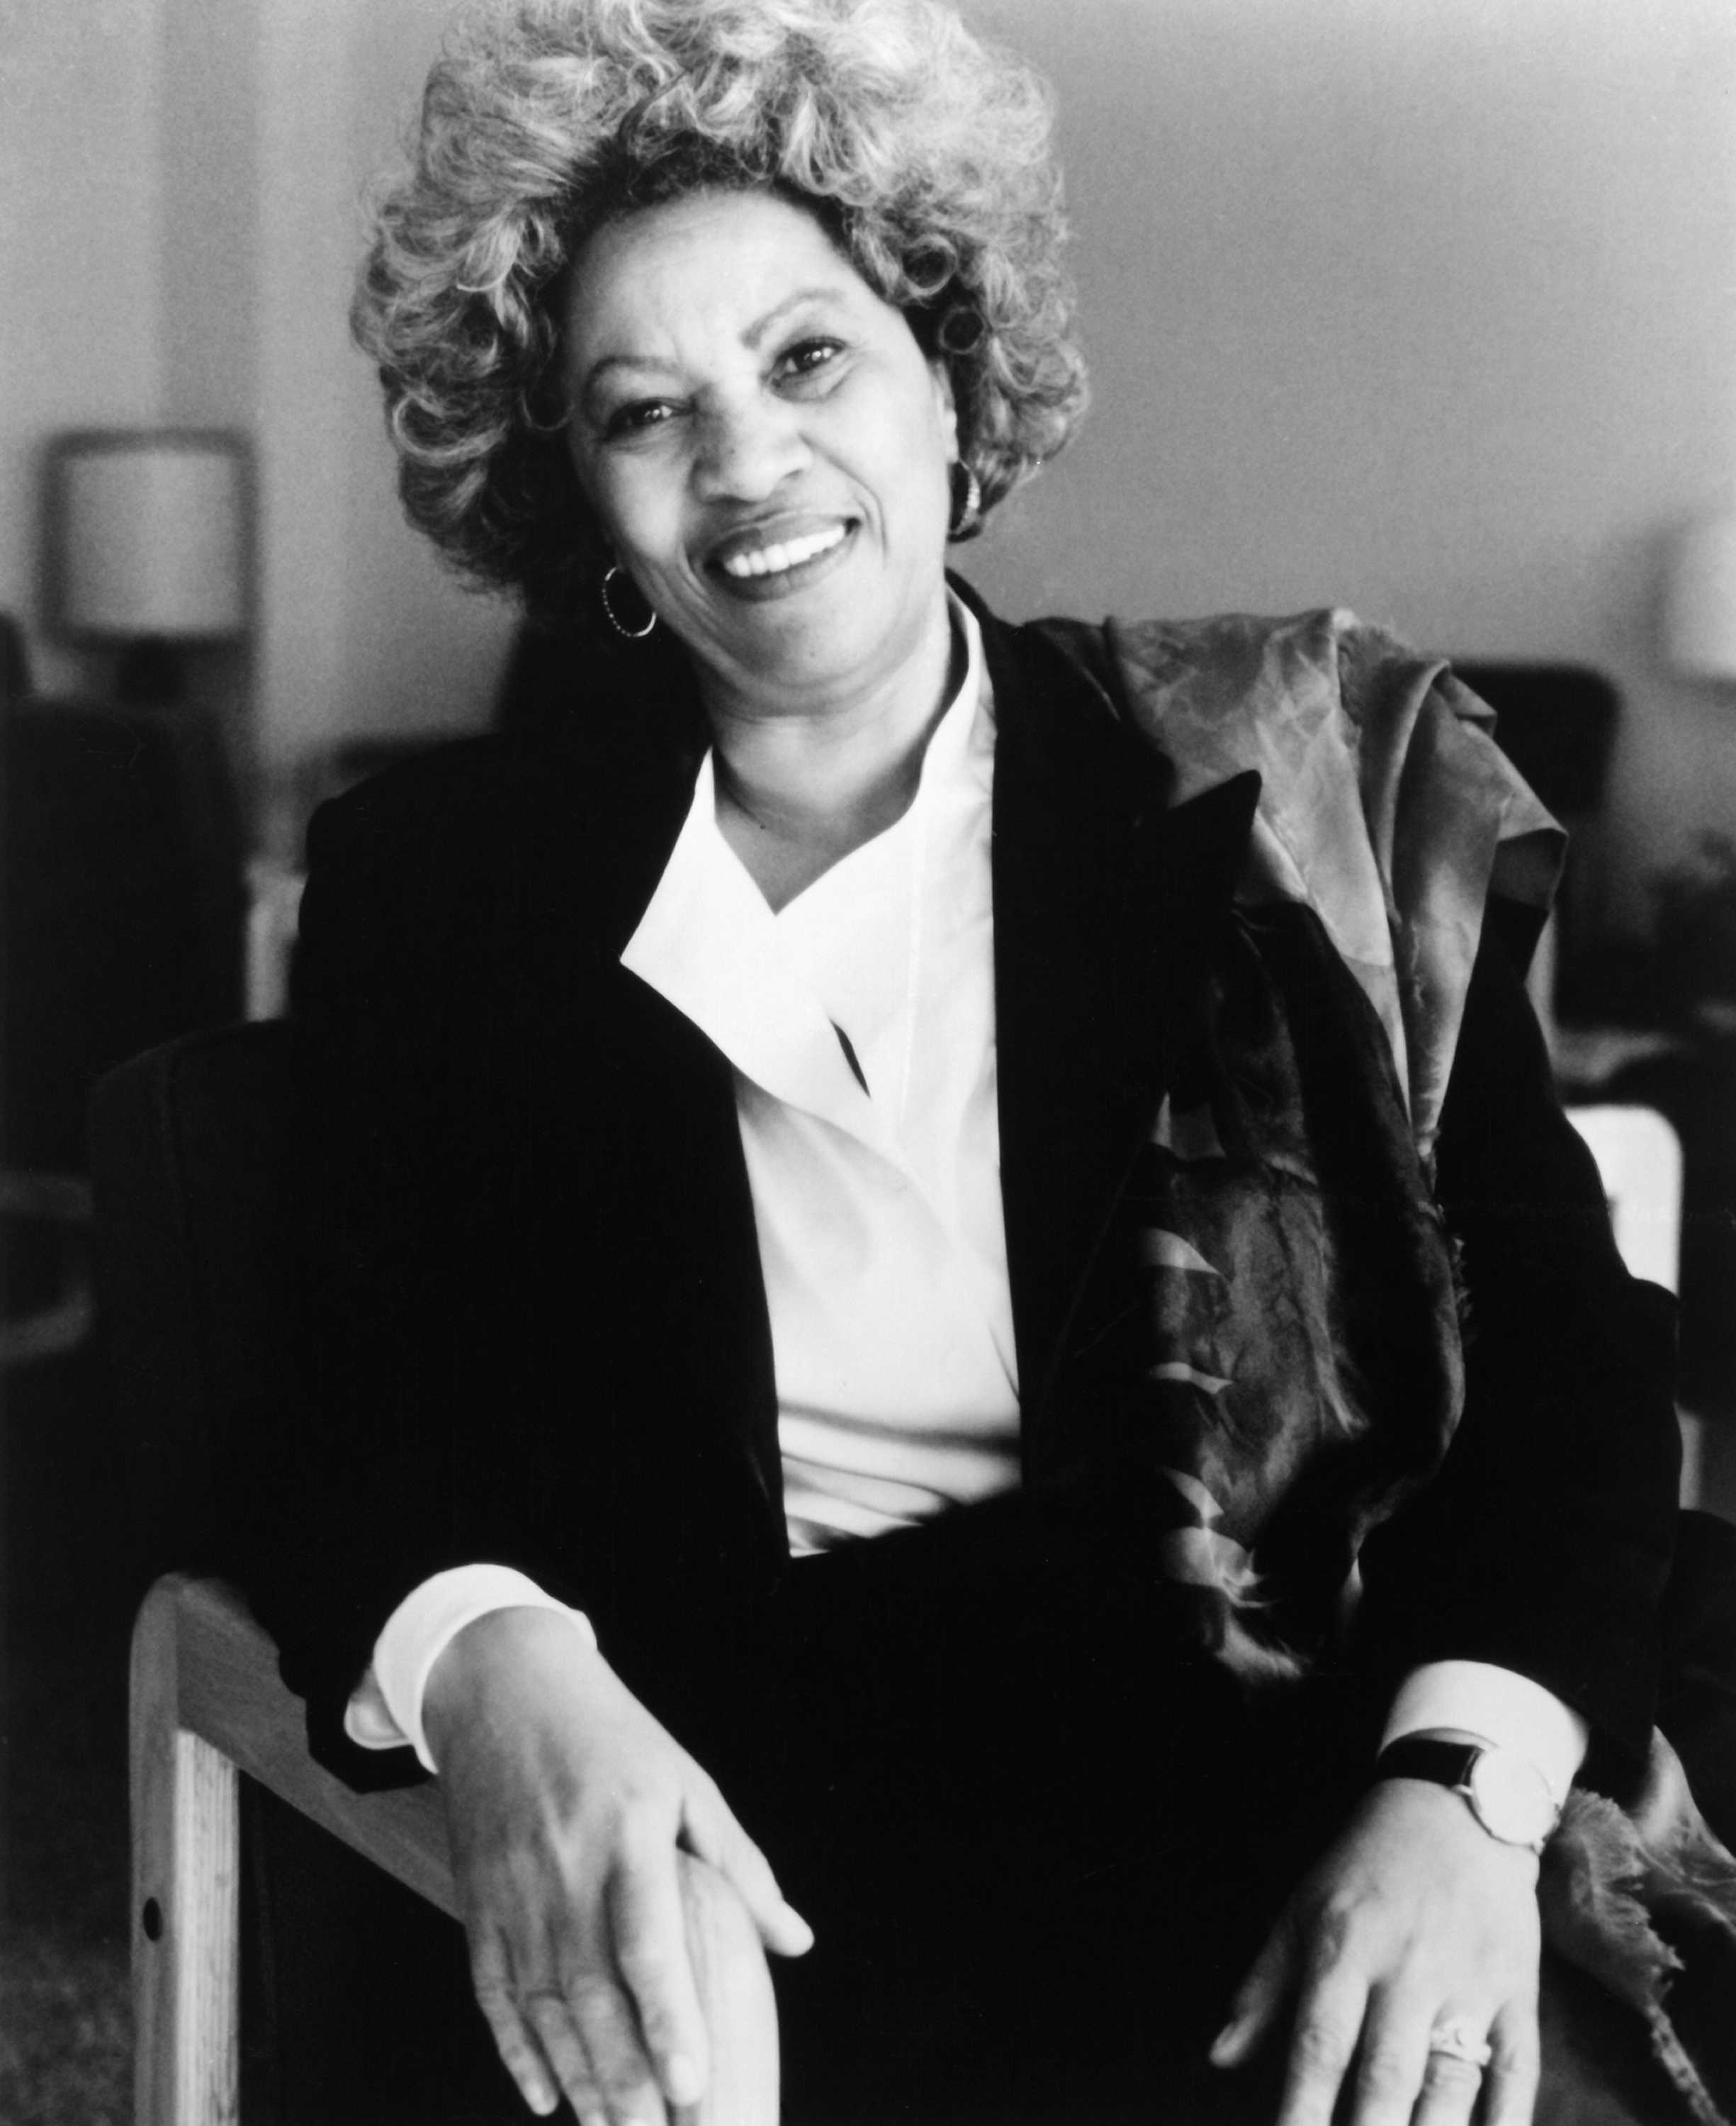 Black and white photograph of Toni Morrison seated in a chair